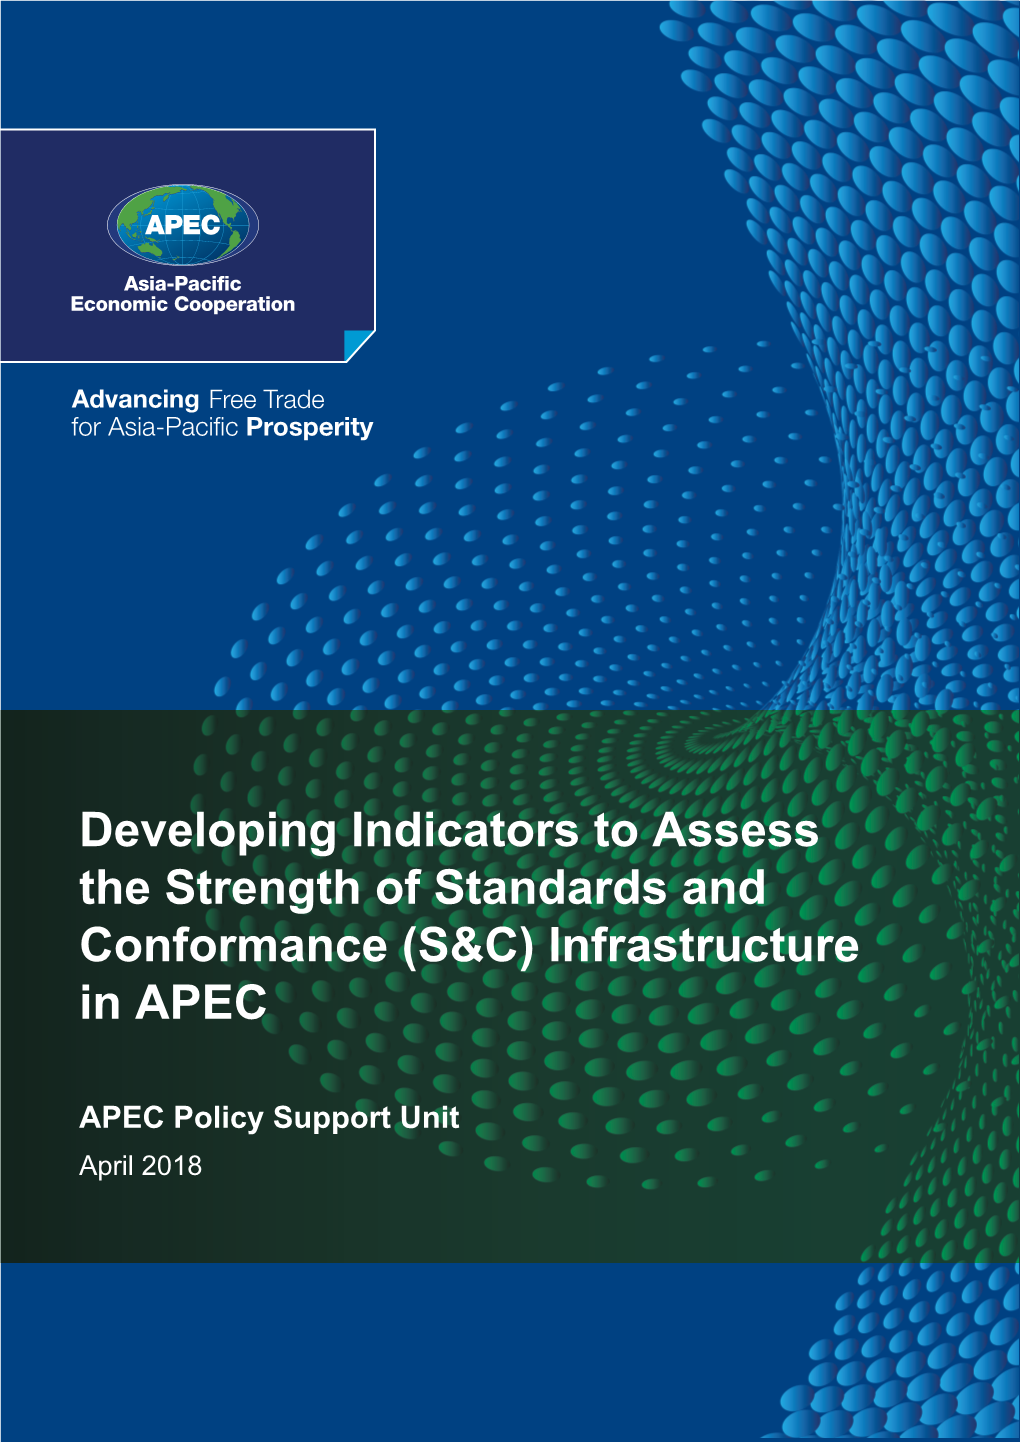 Developing Indicators to Assess the Strength of Standards and Conformance (S&C) Infrastructure in APEC